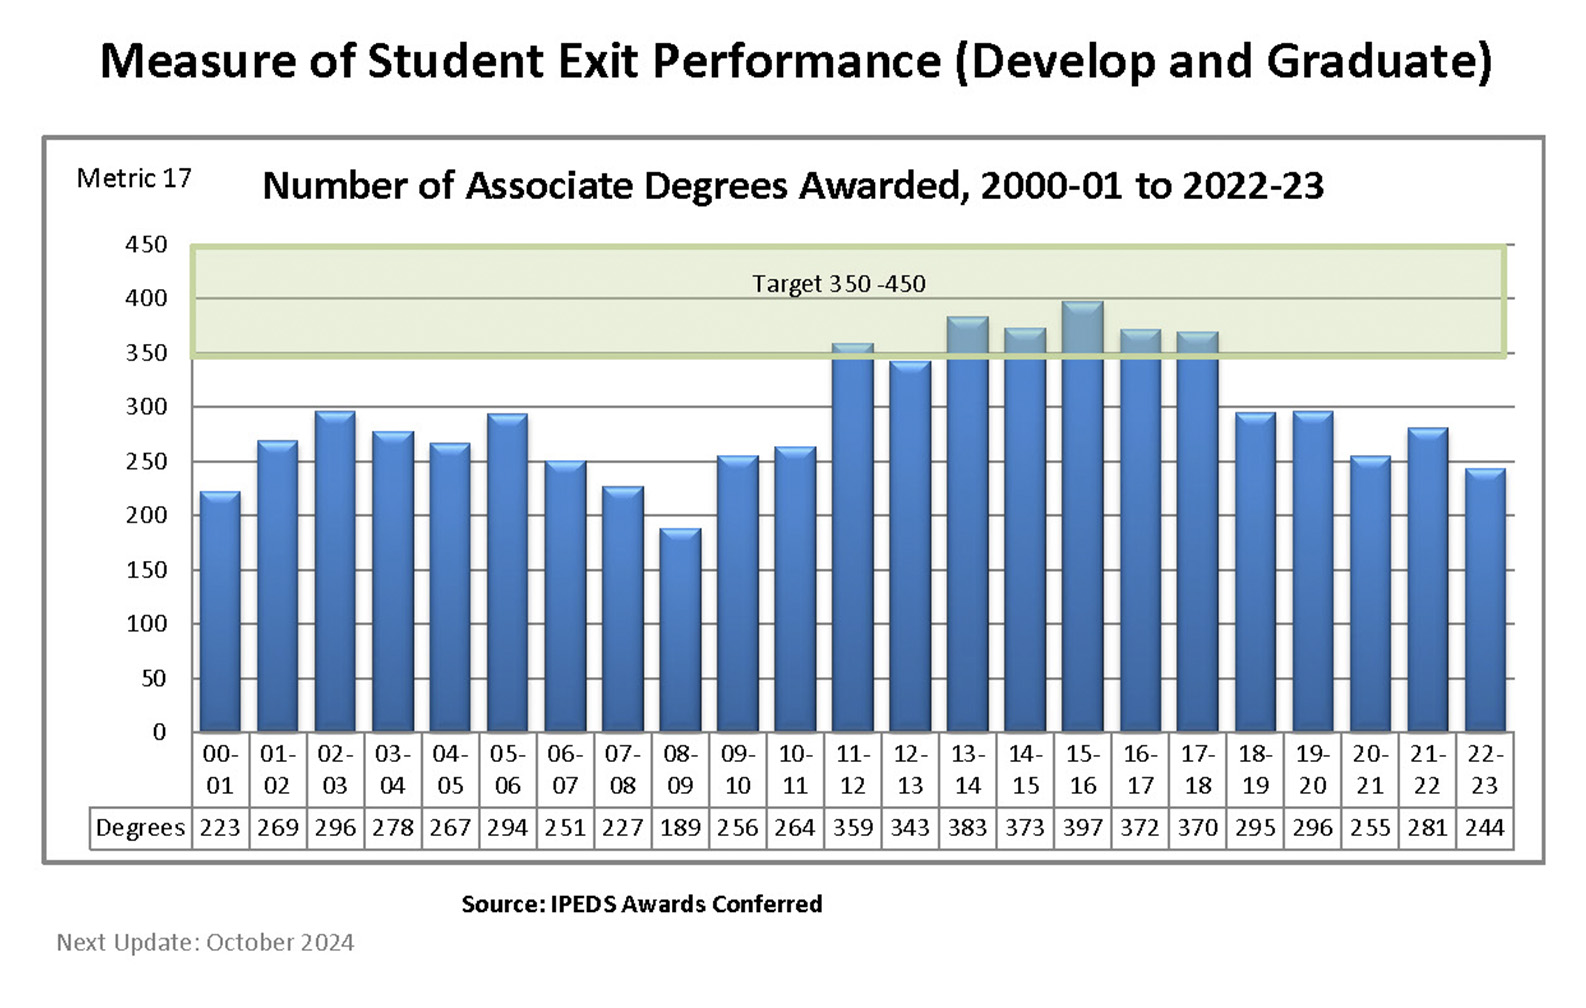 Graph depicting the number of degrees awarded at SMC since 2001. The target is 350-400. It peaked at 397 in 2015-16. Preliminary estimates for 2019-20 is 297.